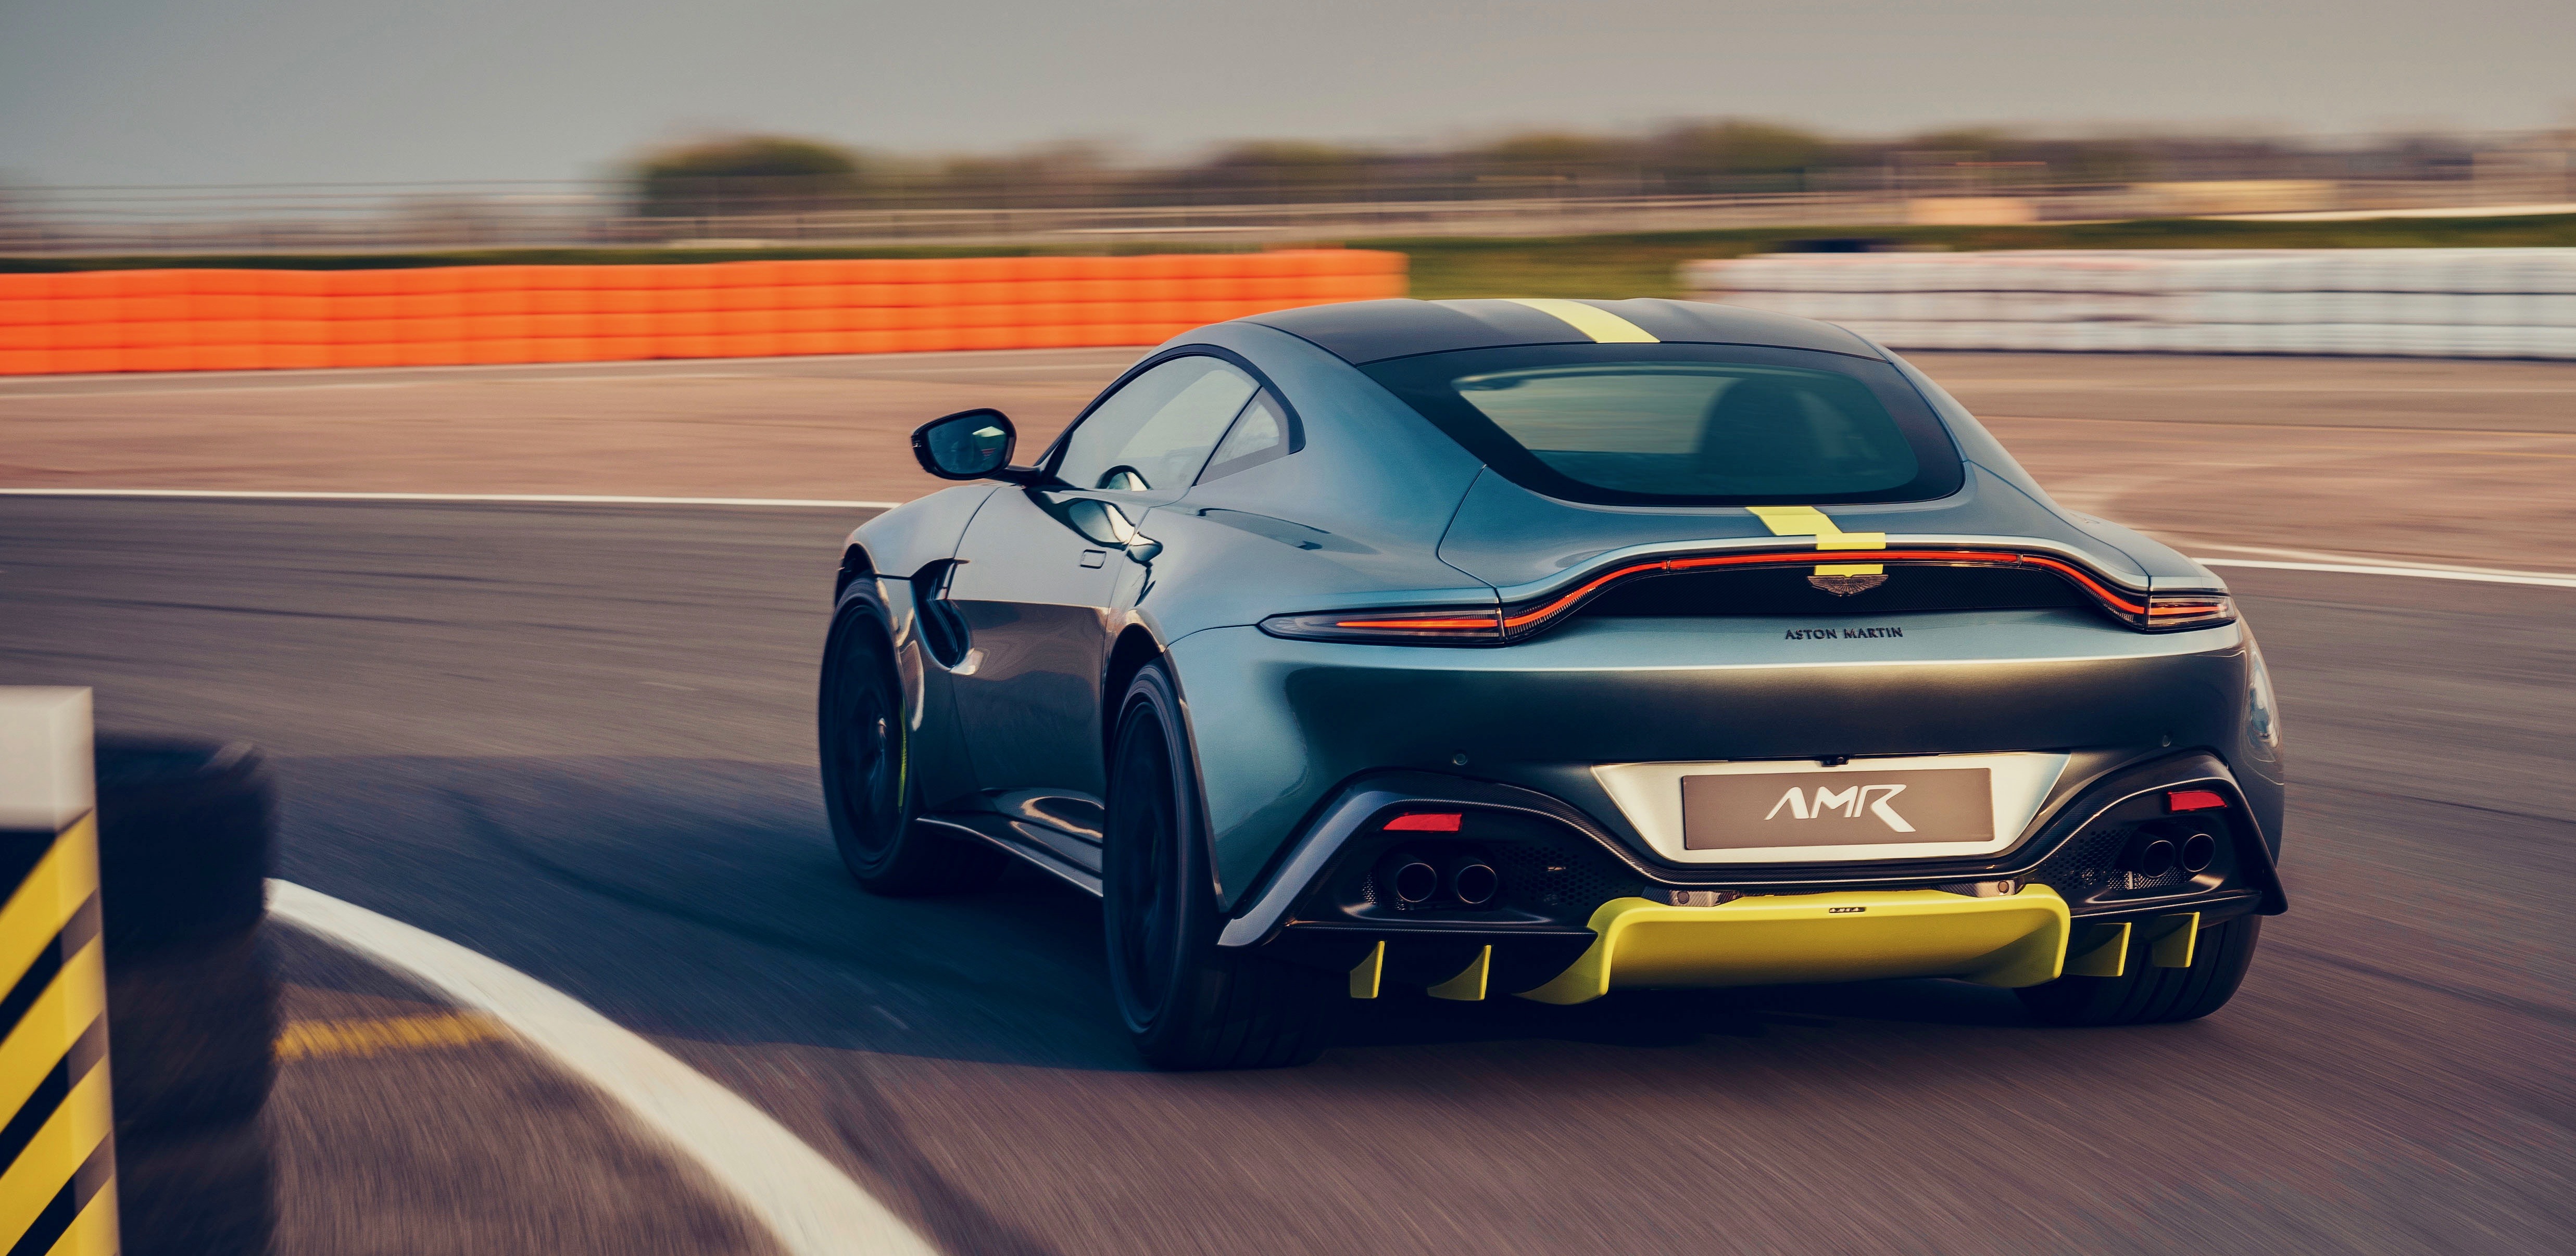 Aston Martin, Aston Martin offers third-pedal for new Vantage AMR, ClassicCars.com Journal